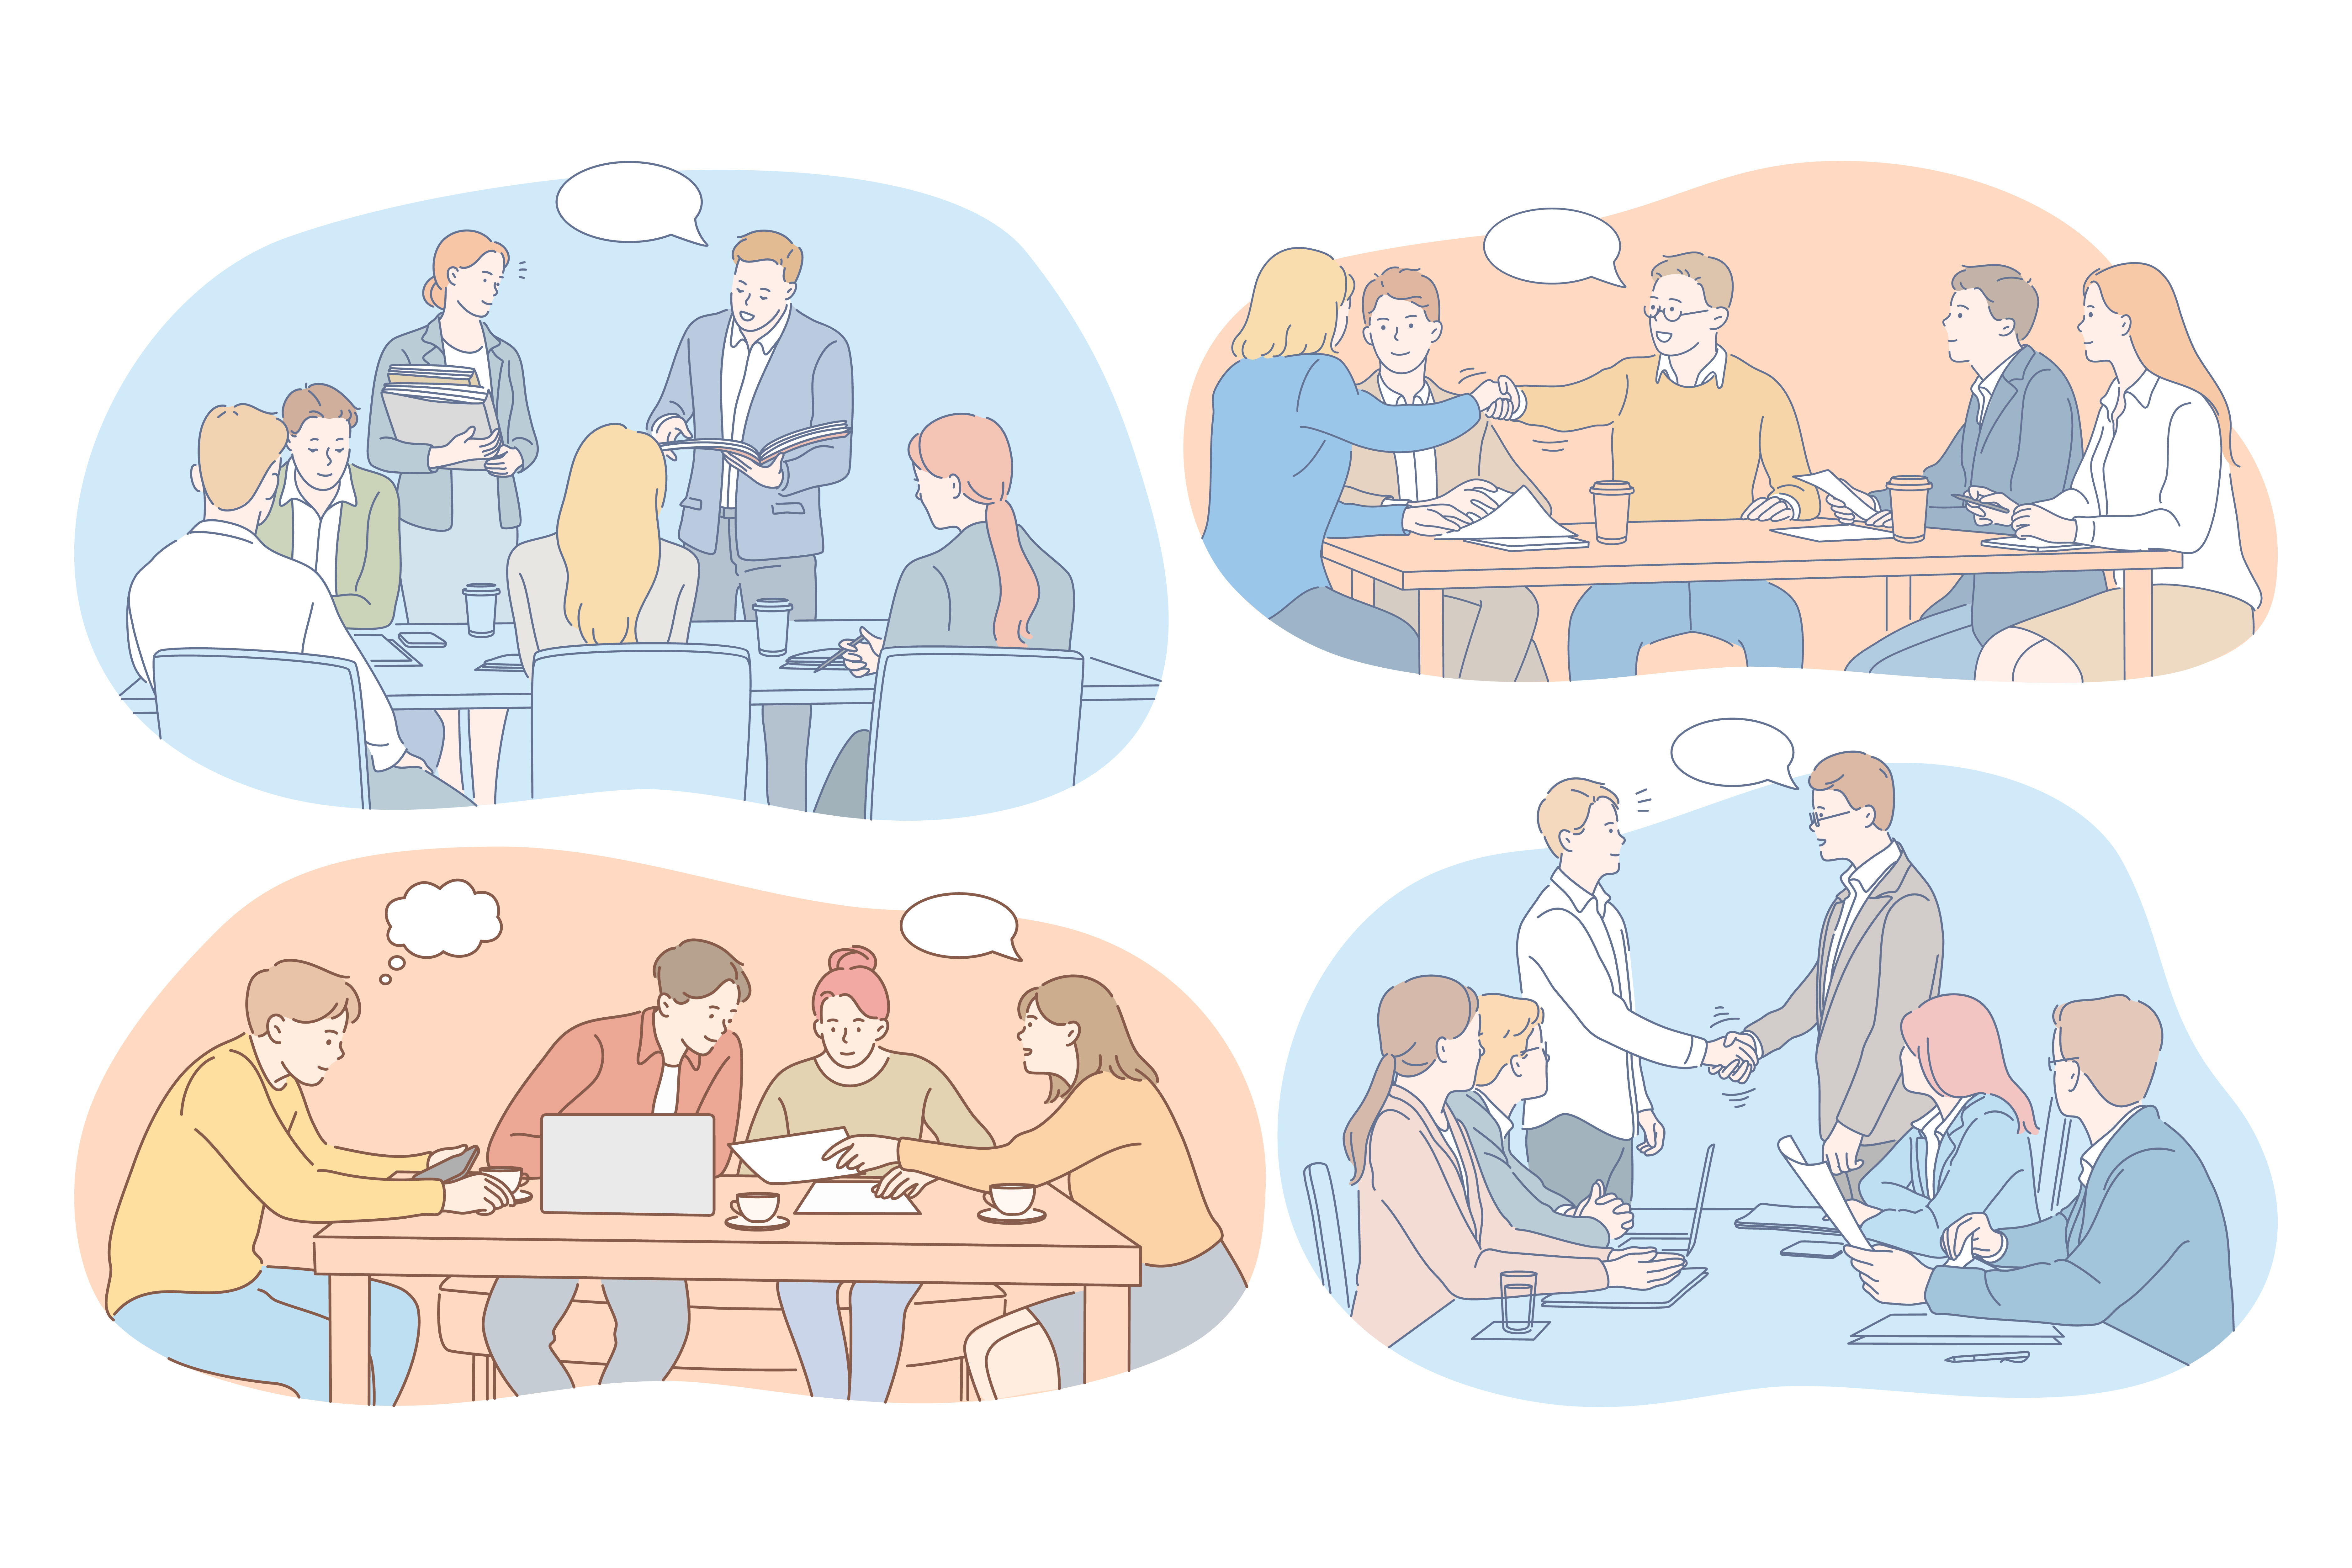 Negotiations, brainstorming, teamwork, cooperation, business, development, success concept. Young business people partners coworkers cartoon characters discussing projects in office and making deals. Negotiations, brainstorming, teamwork, cooperation, business, development, success concept